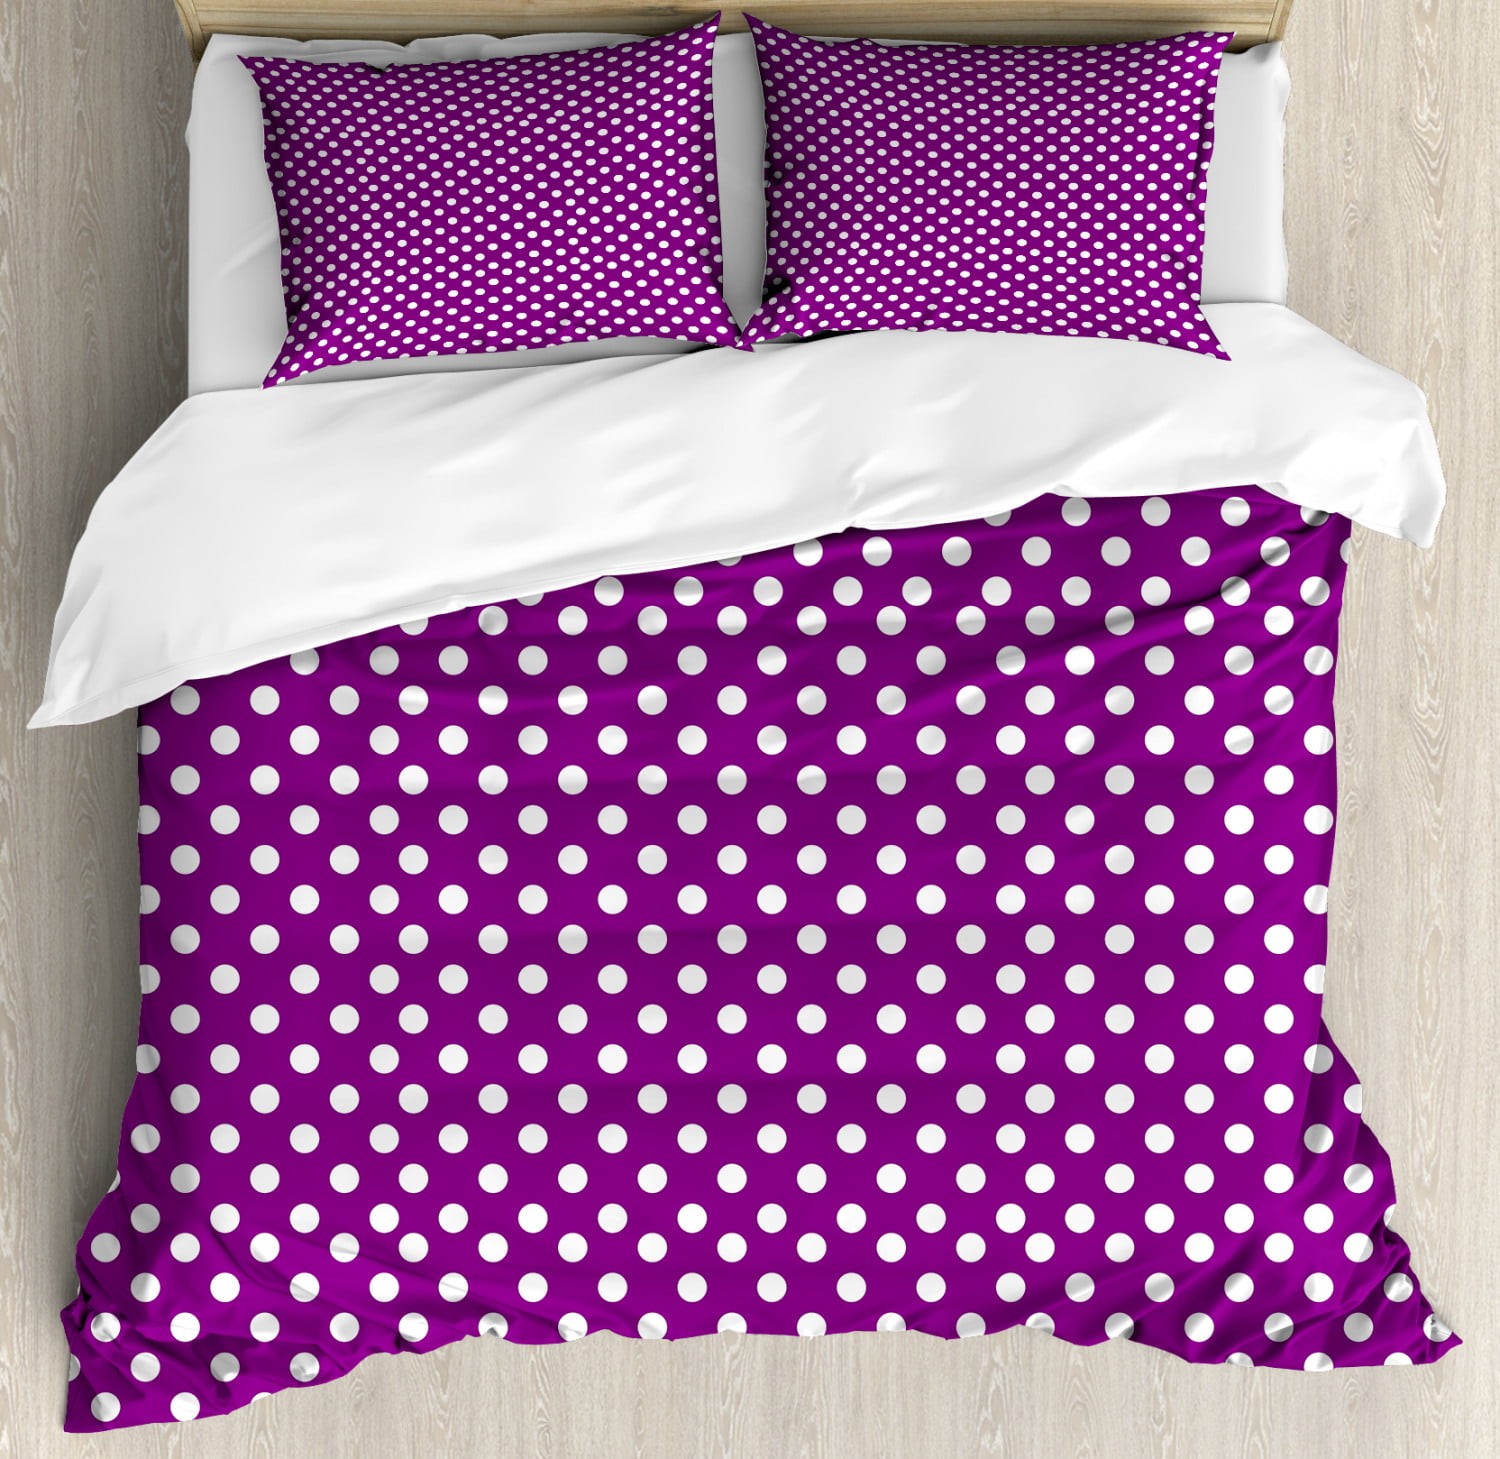 Purple Duvet Cover Set White Polka Dots Continuous Pattern On